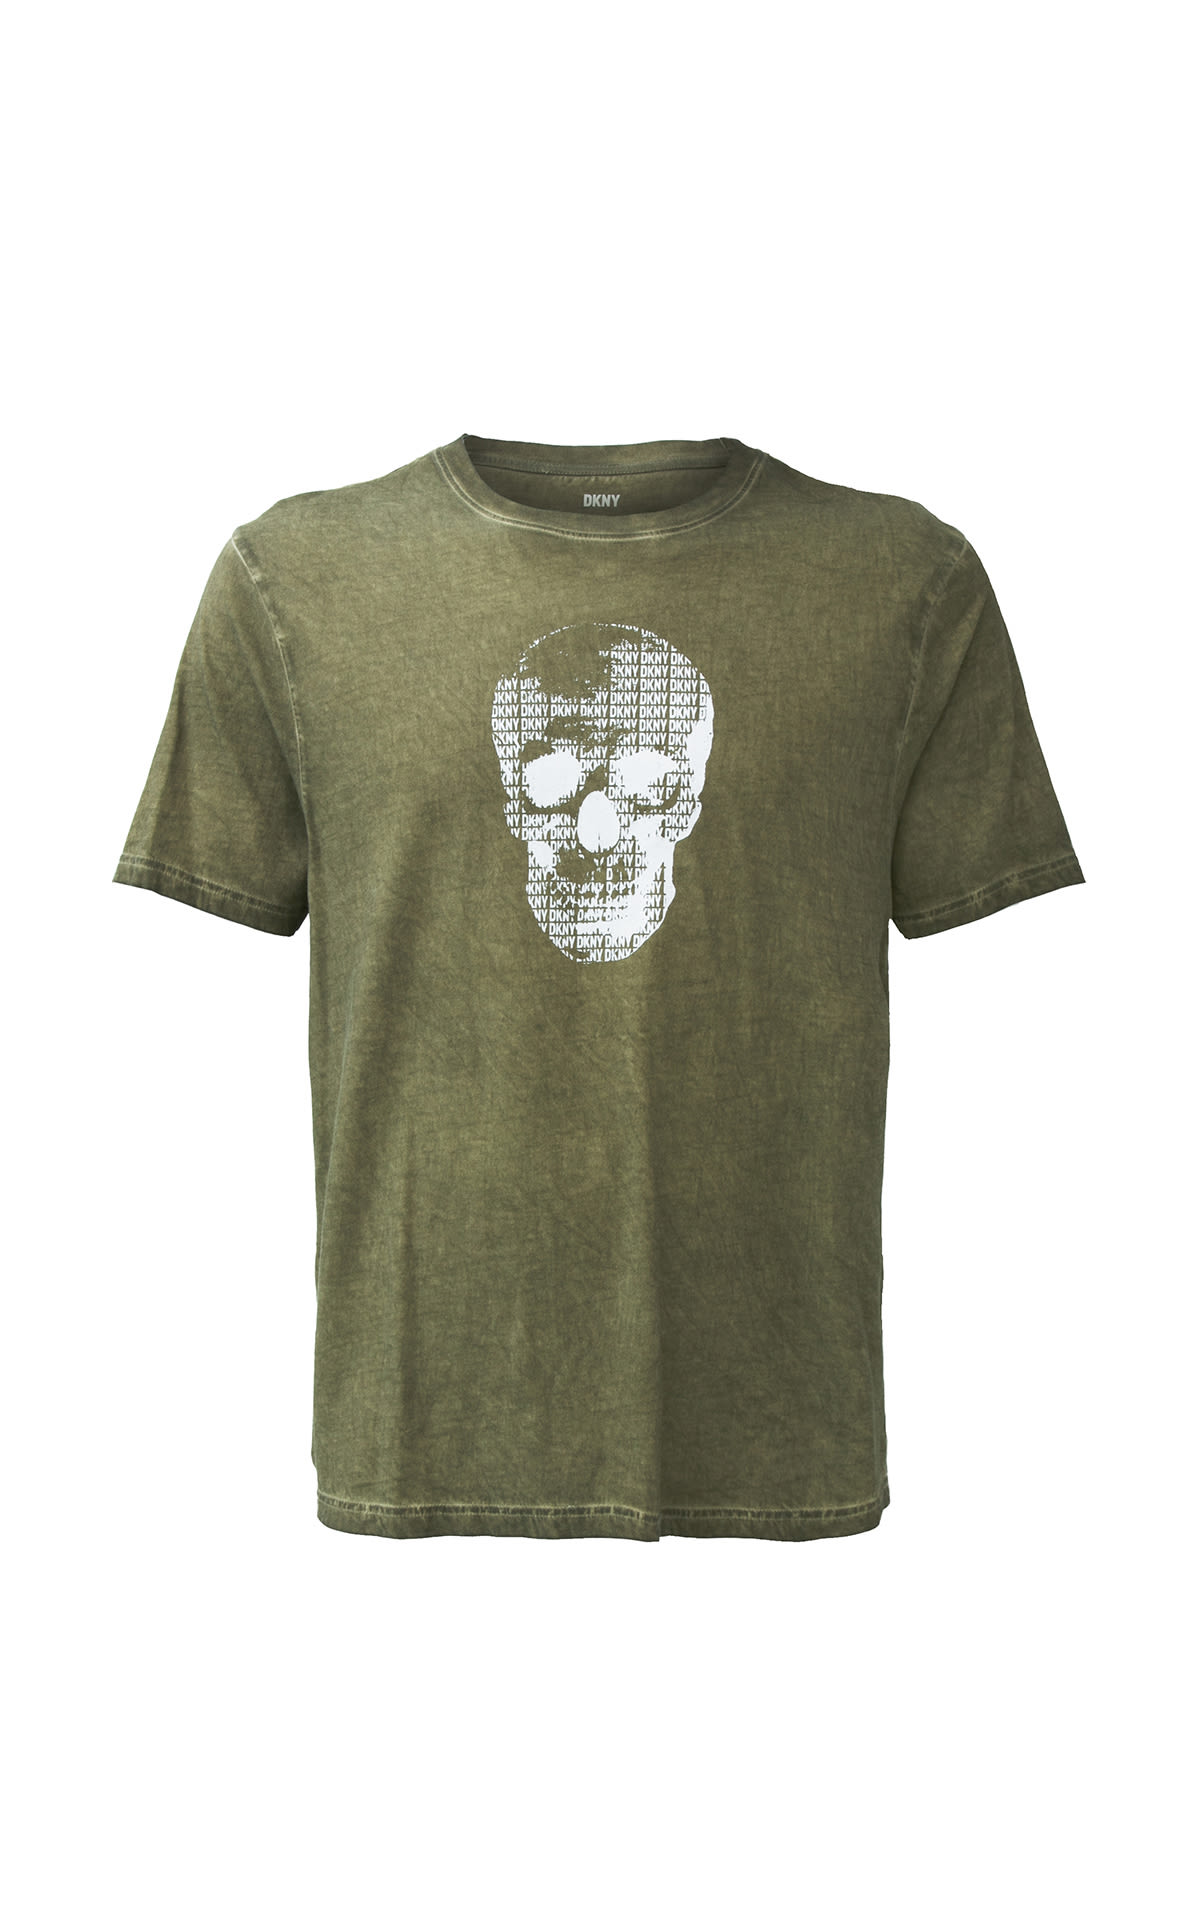 DKNY Outline logo skull mineral wash tee from Bicester Village